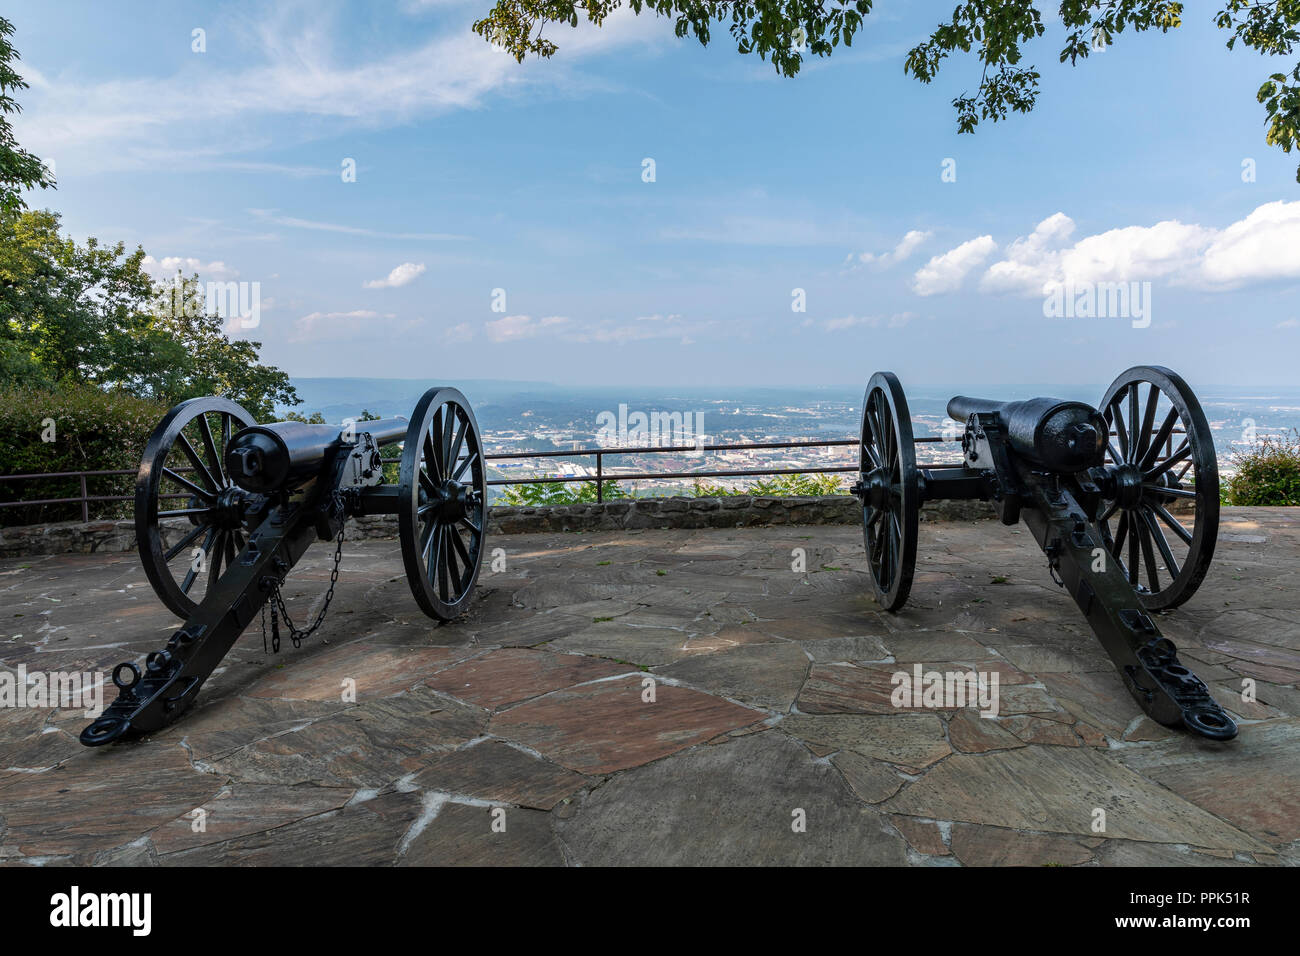 Civil War Cannons At Scenic Overlook Stock Photo